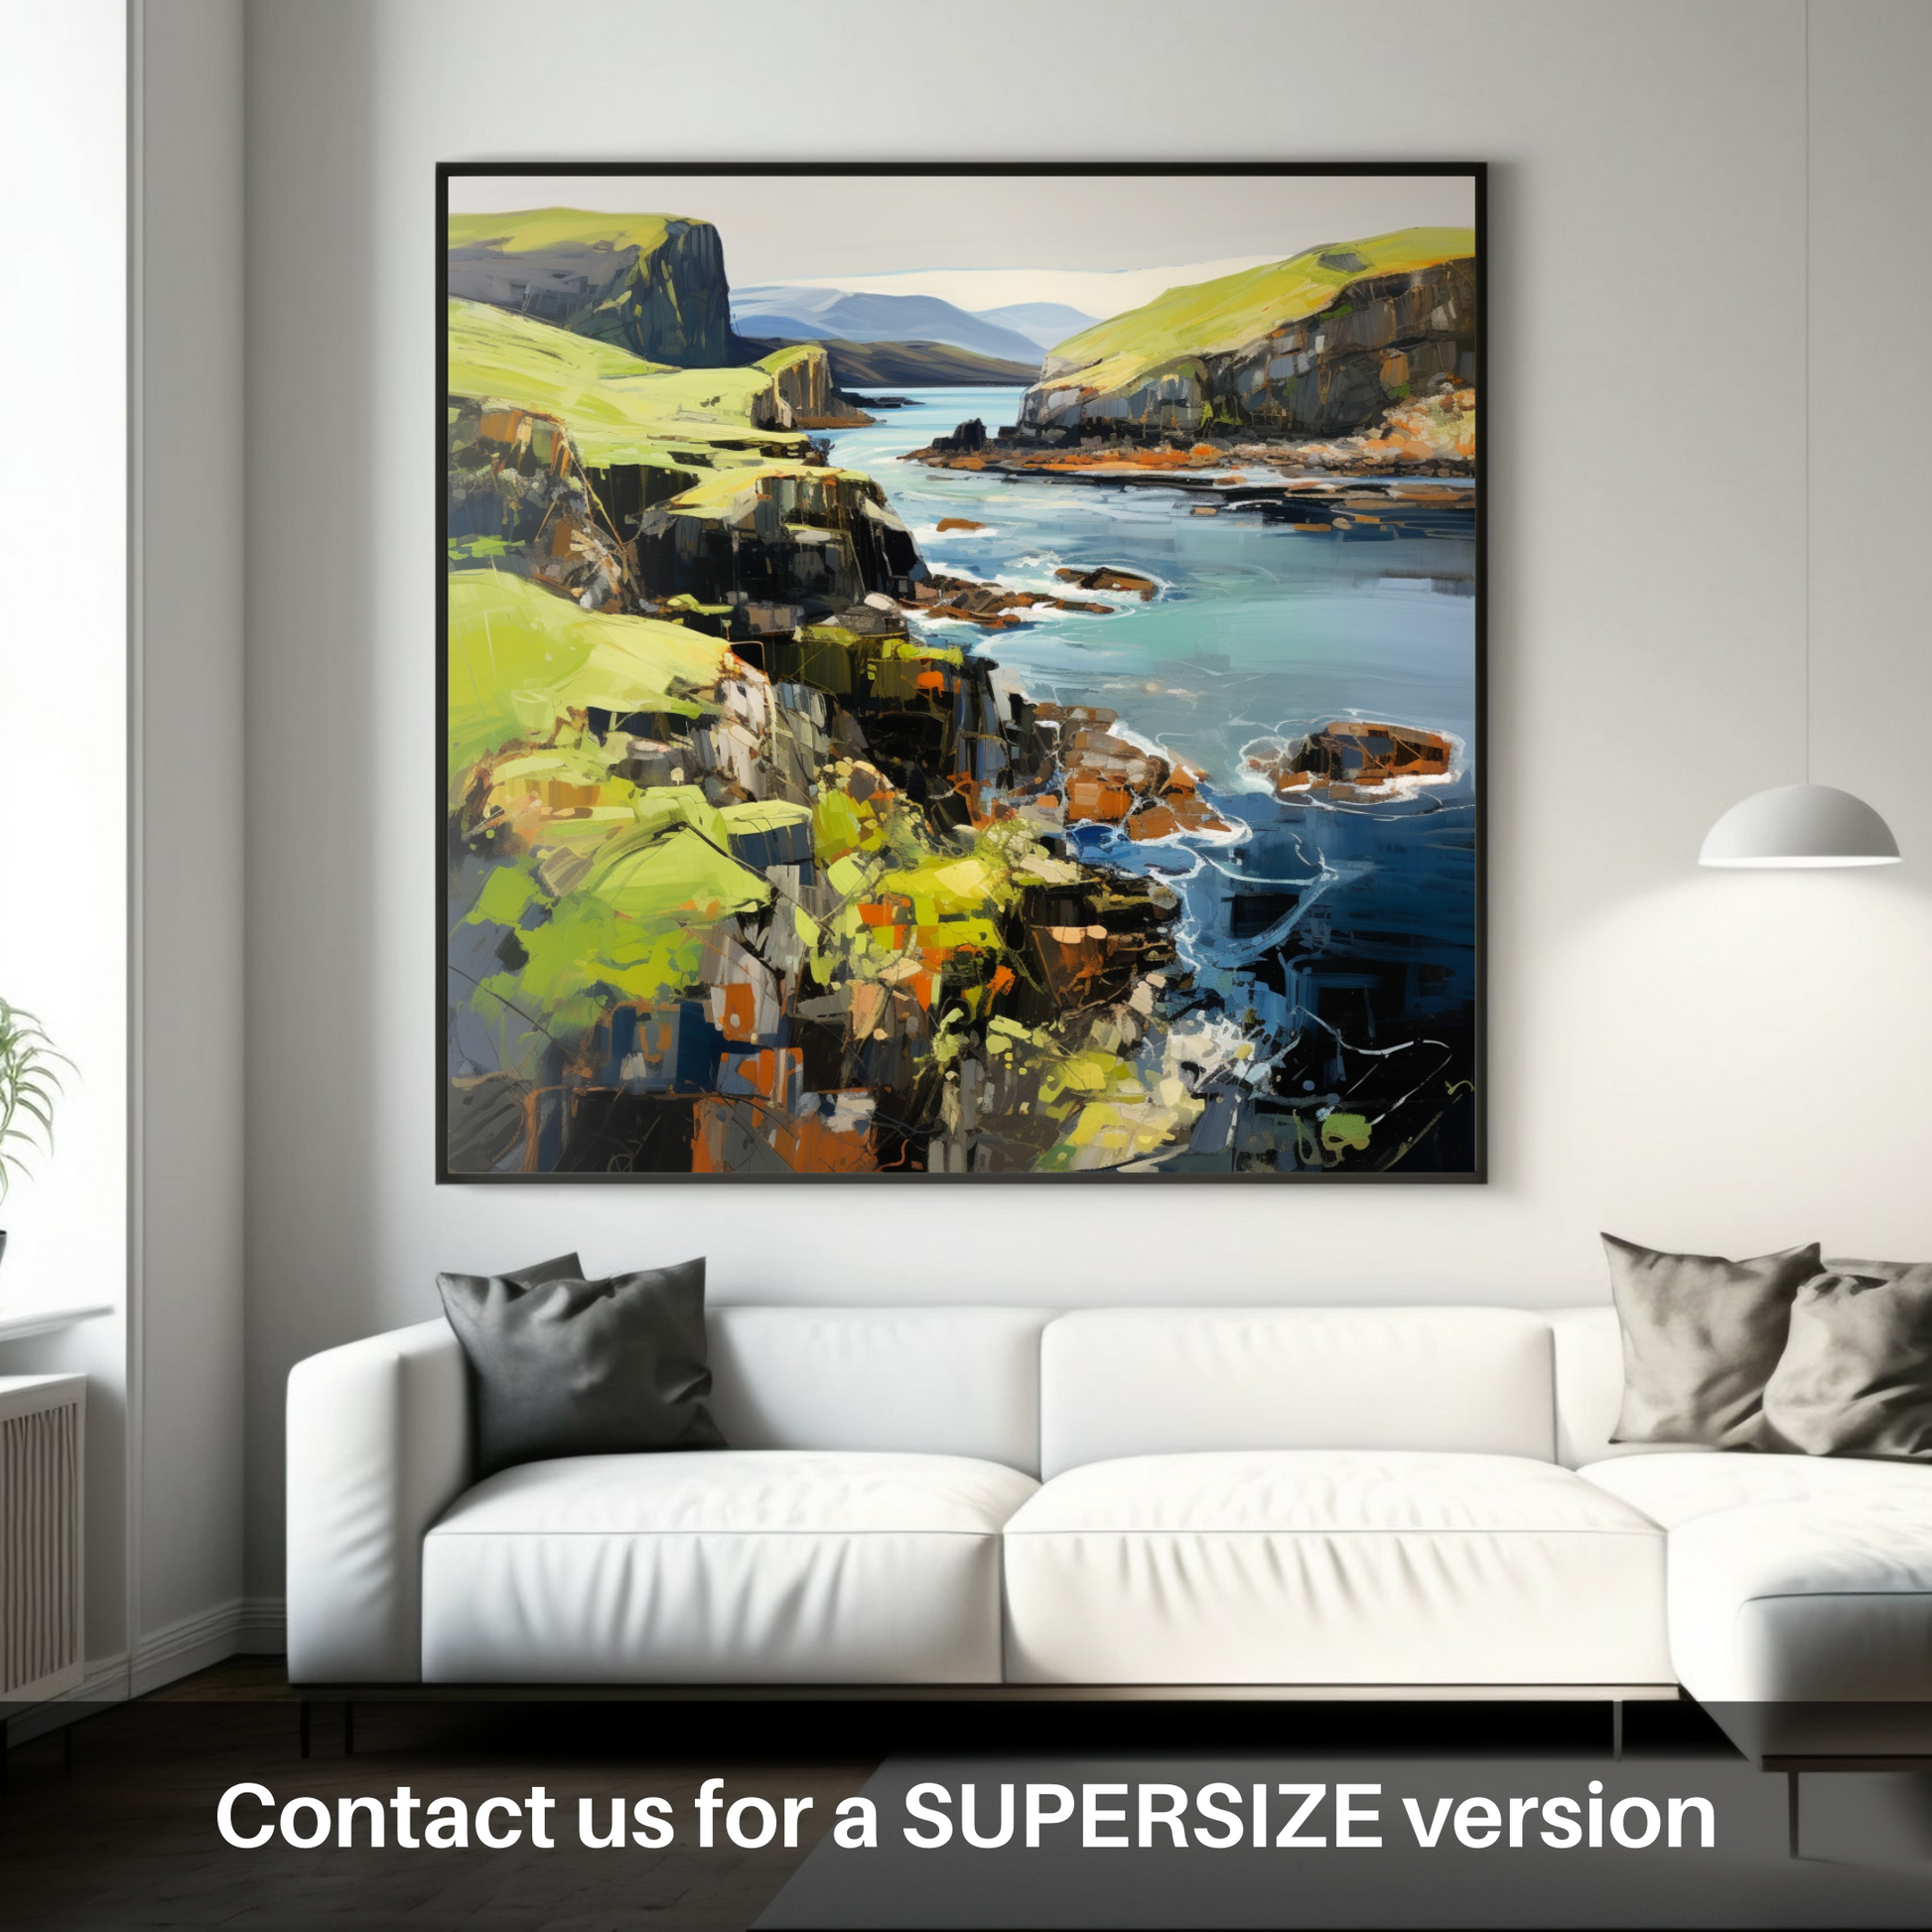 Huge supersize print of Easdale Sound, Easdale, Argyll and Bute